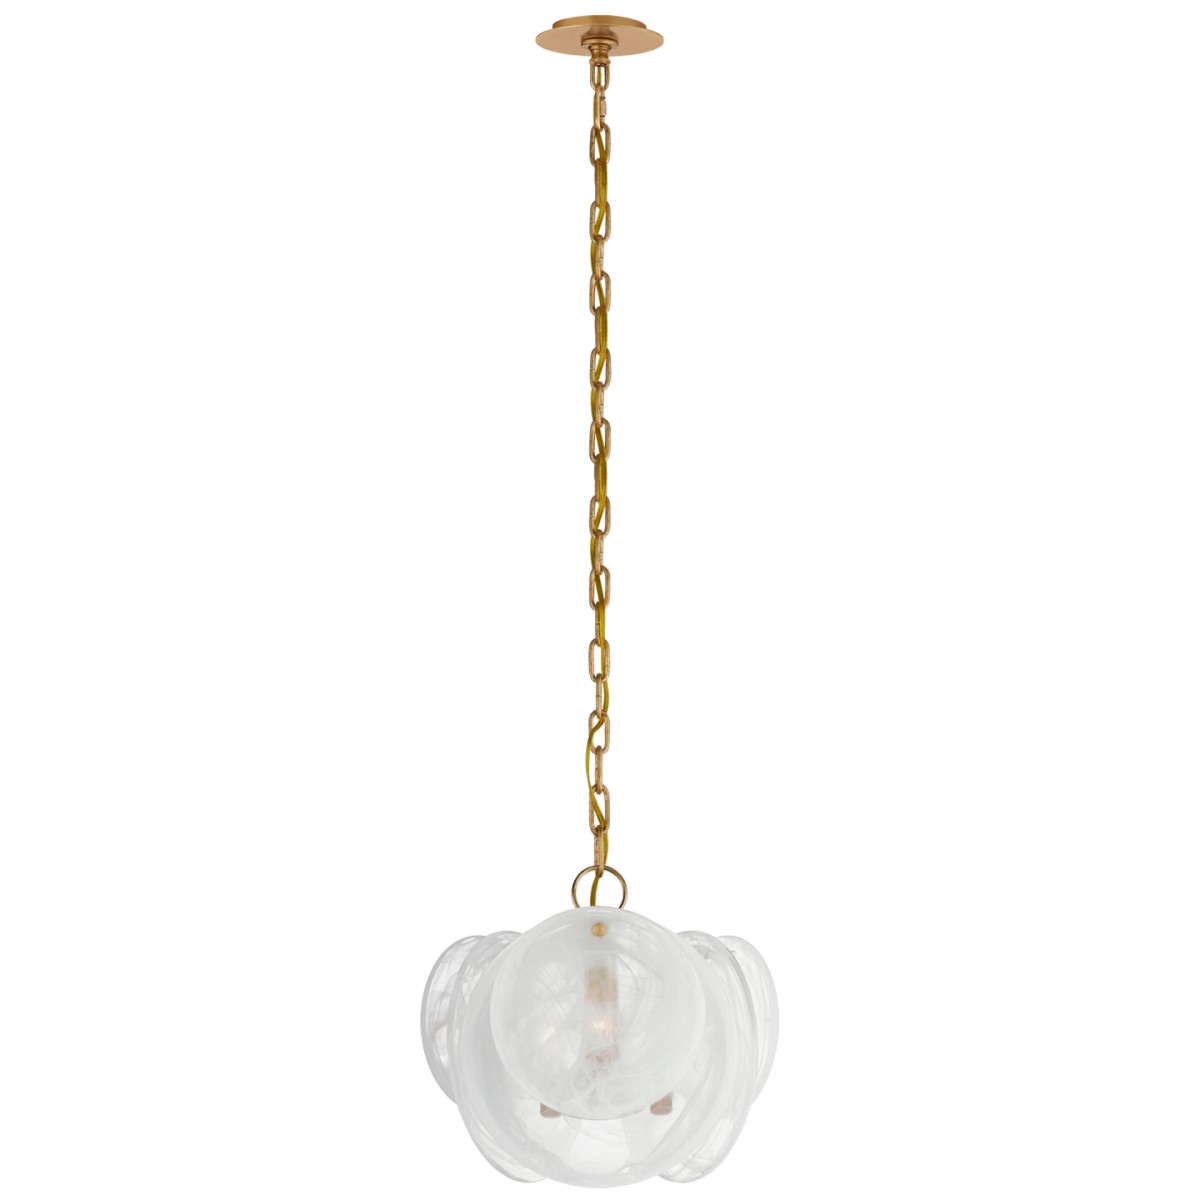 Loire Petite Chandelier with White Strie Glass | Highlight image